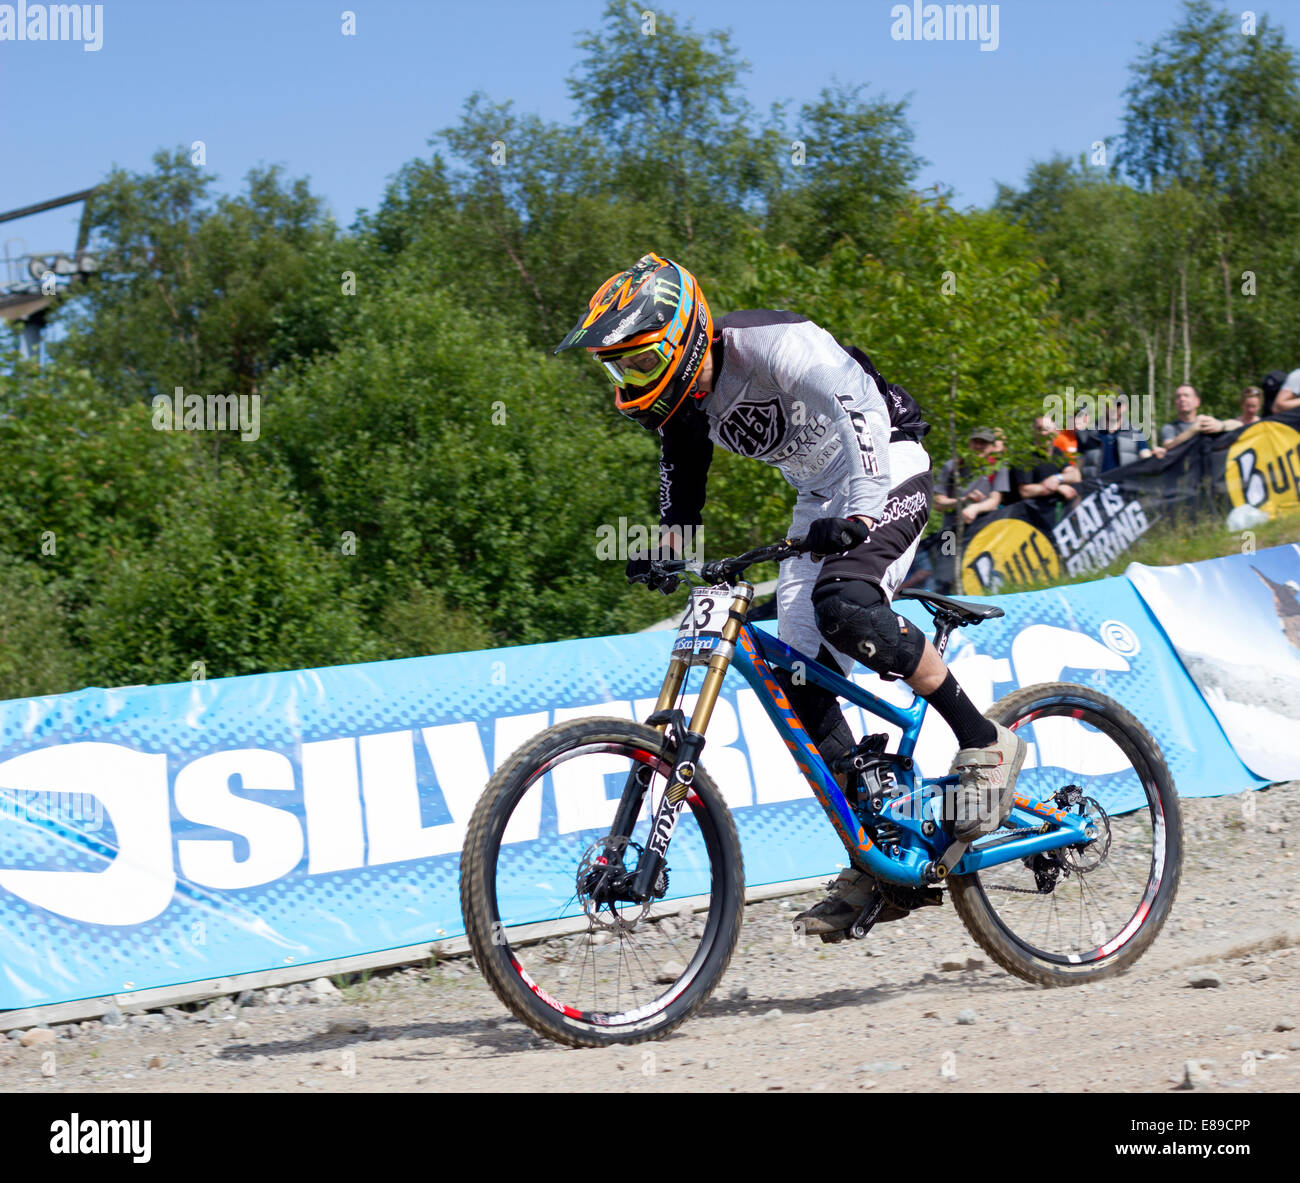 Brendan Fairclough competere a UCI Mountainbike World Cup Foto Stock